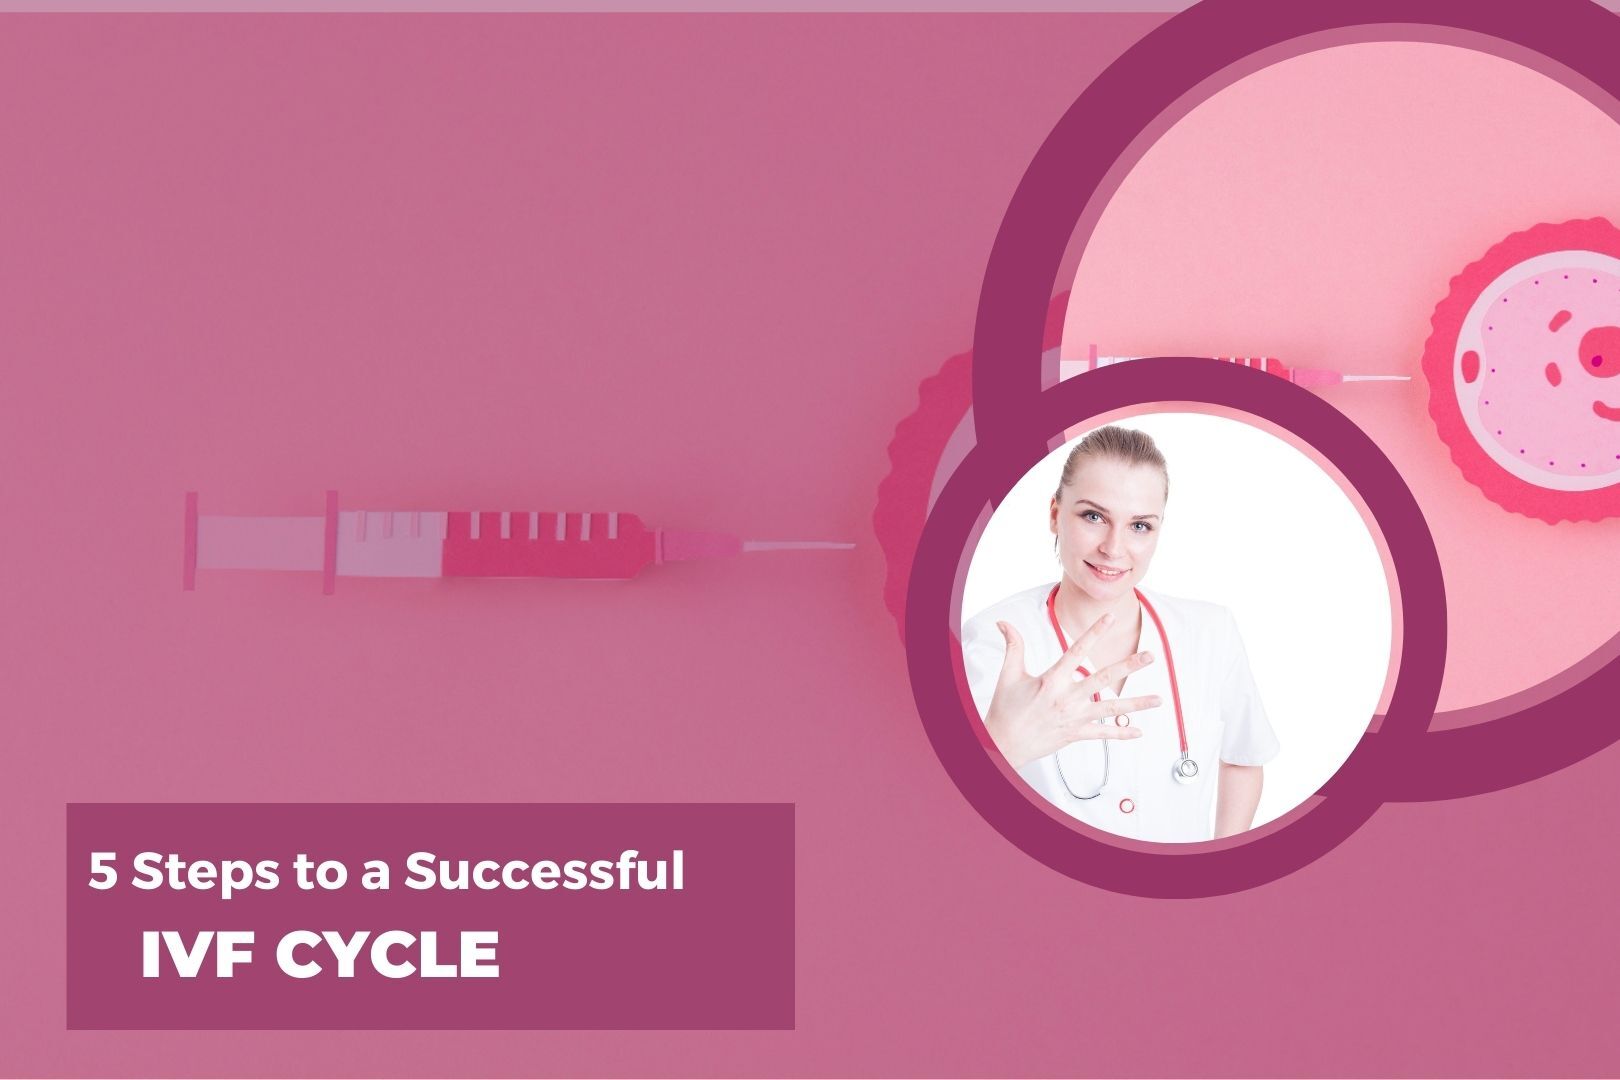 5 Steps to a Successful IVF Cycle